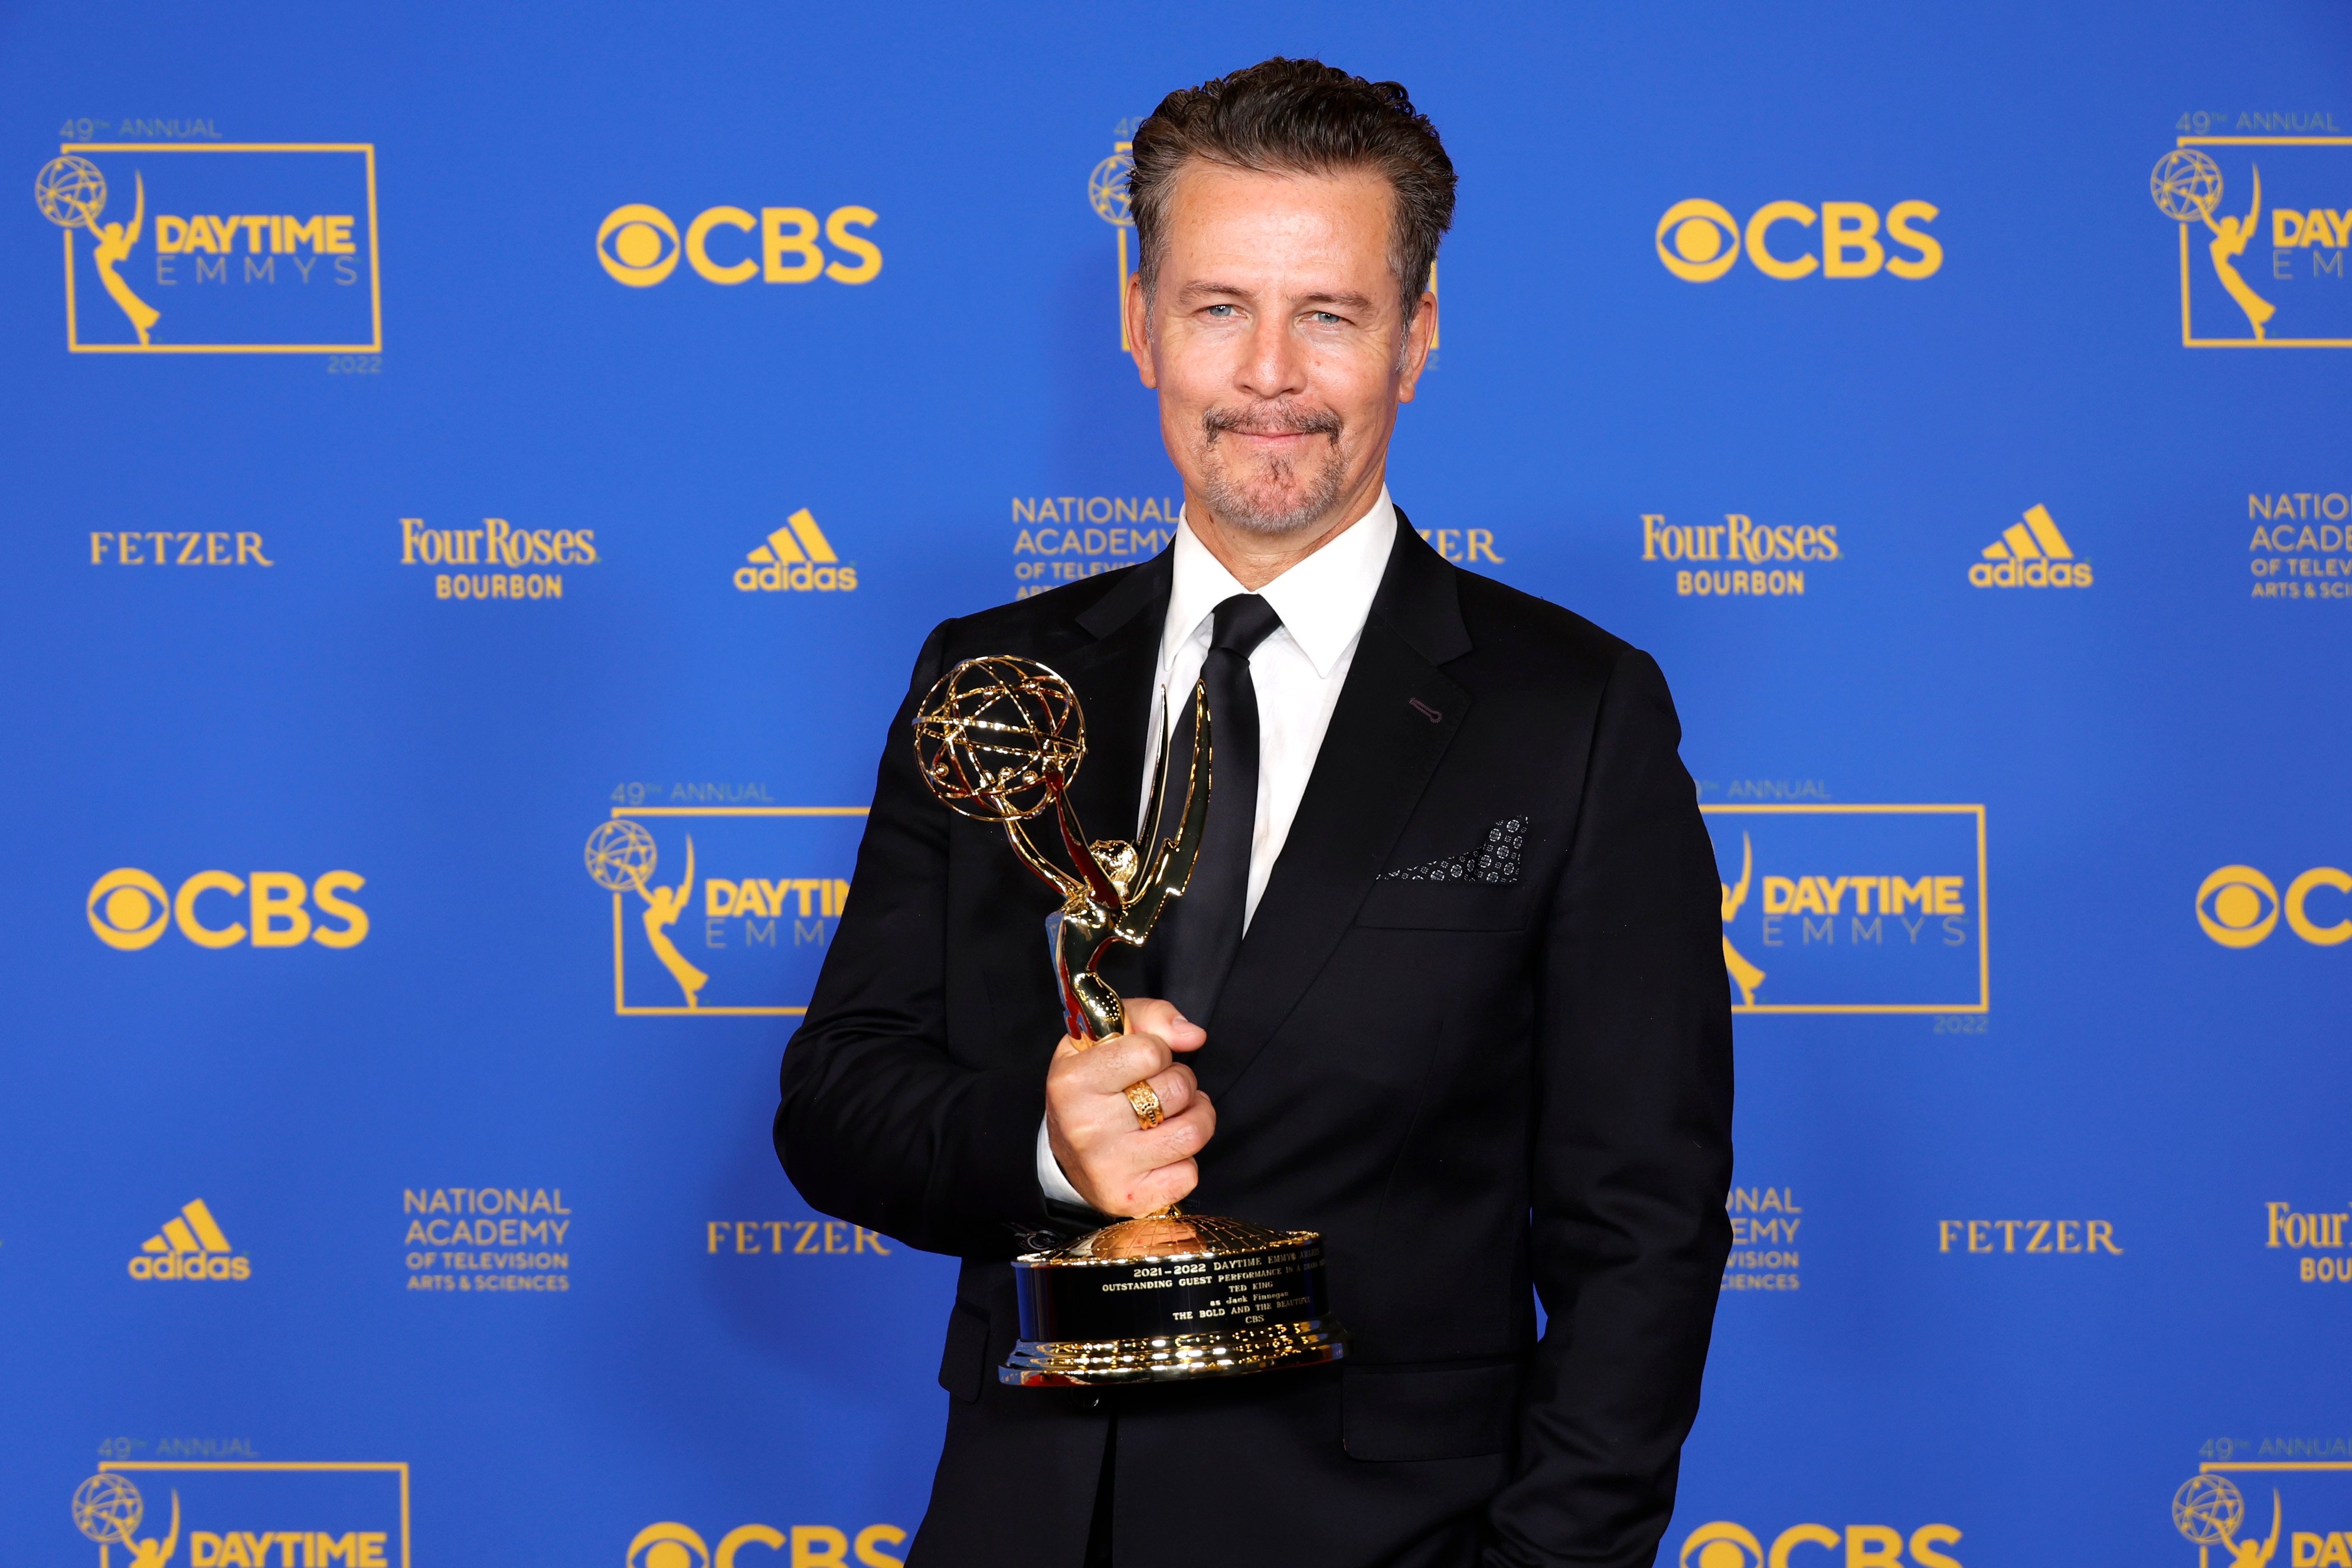 'The Bold and the Beautiful' star Ted King in a tuxedo and holding an Emmy.